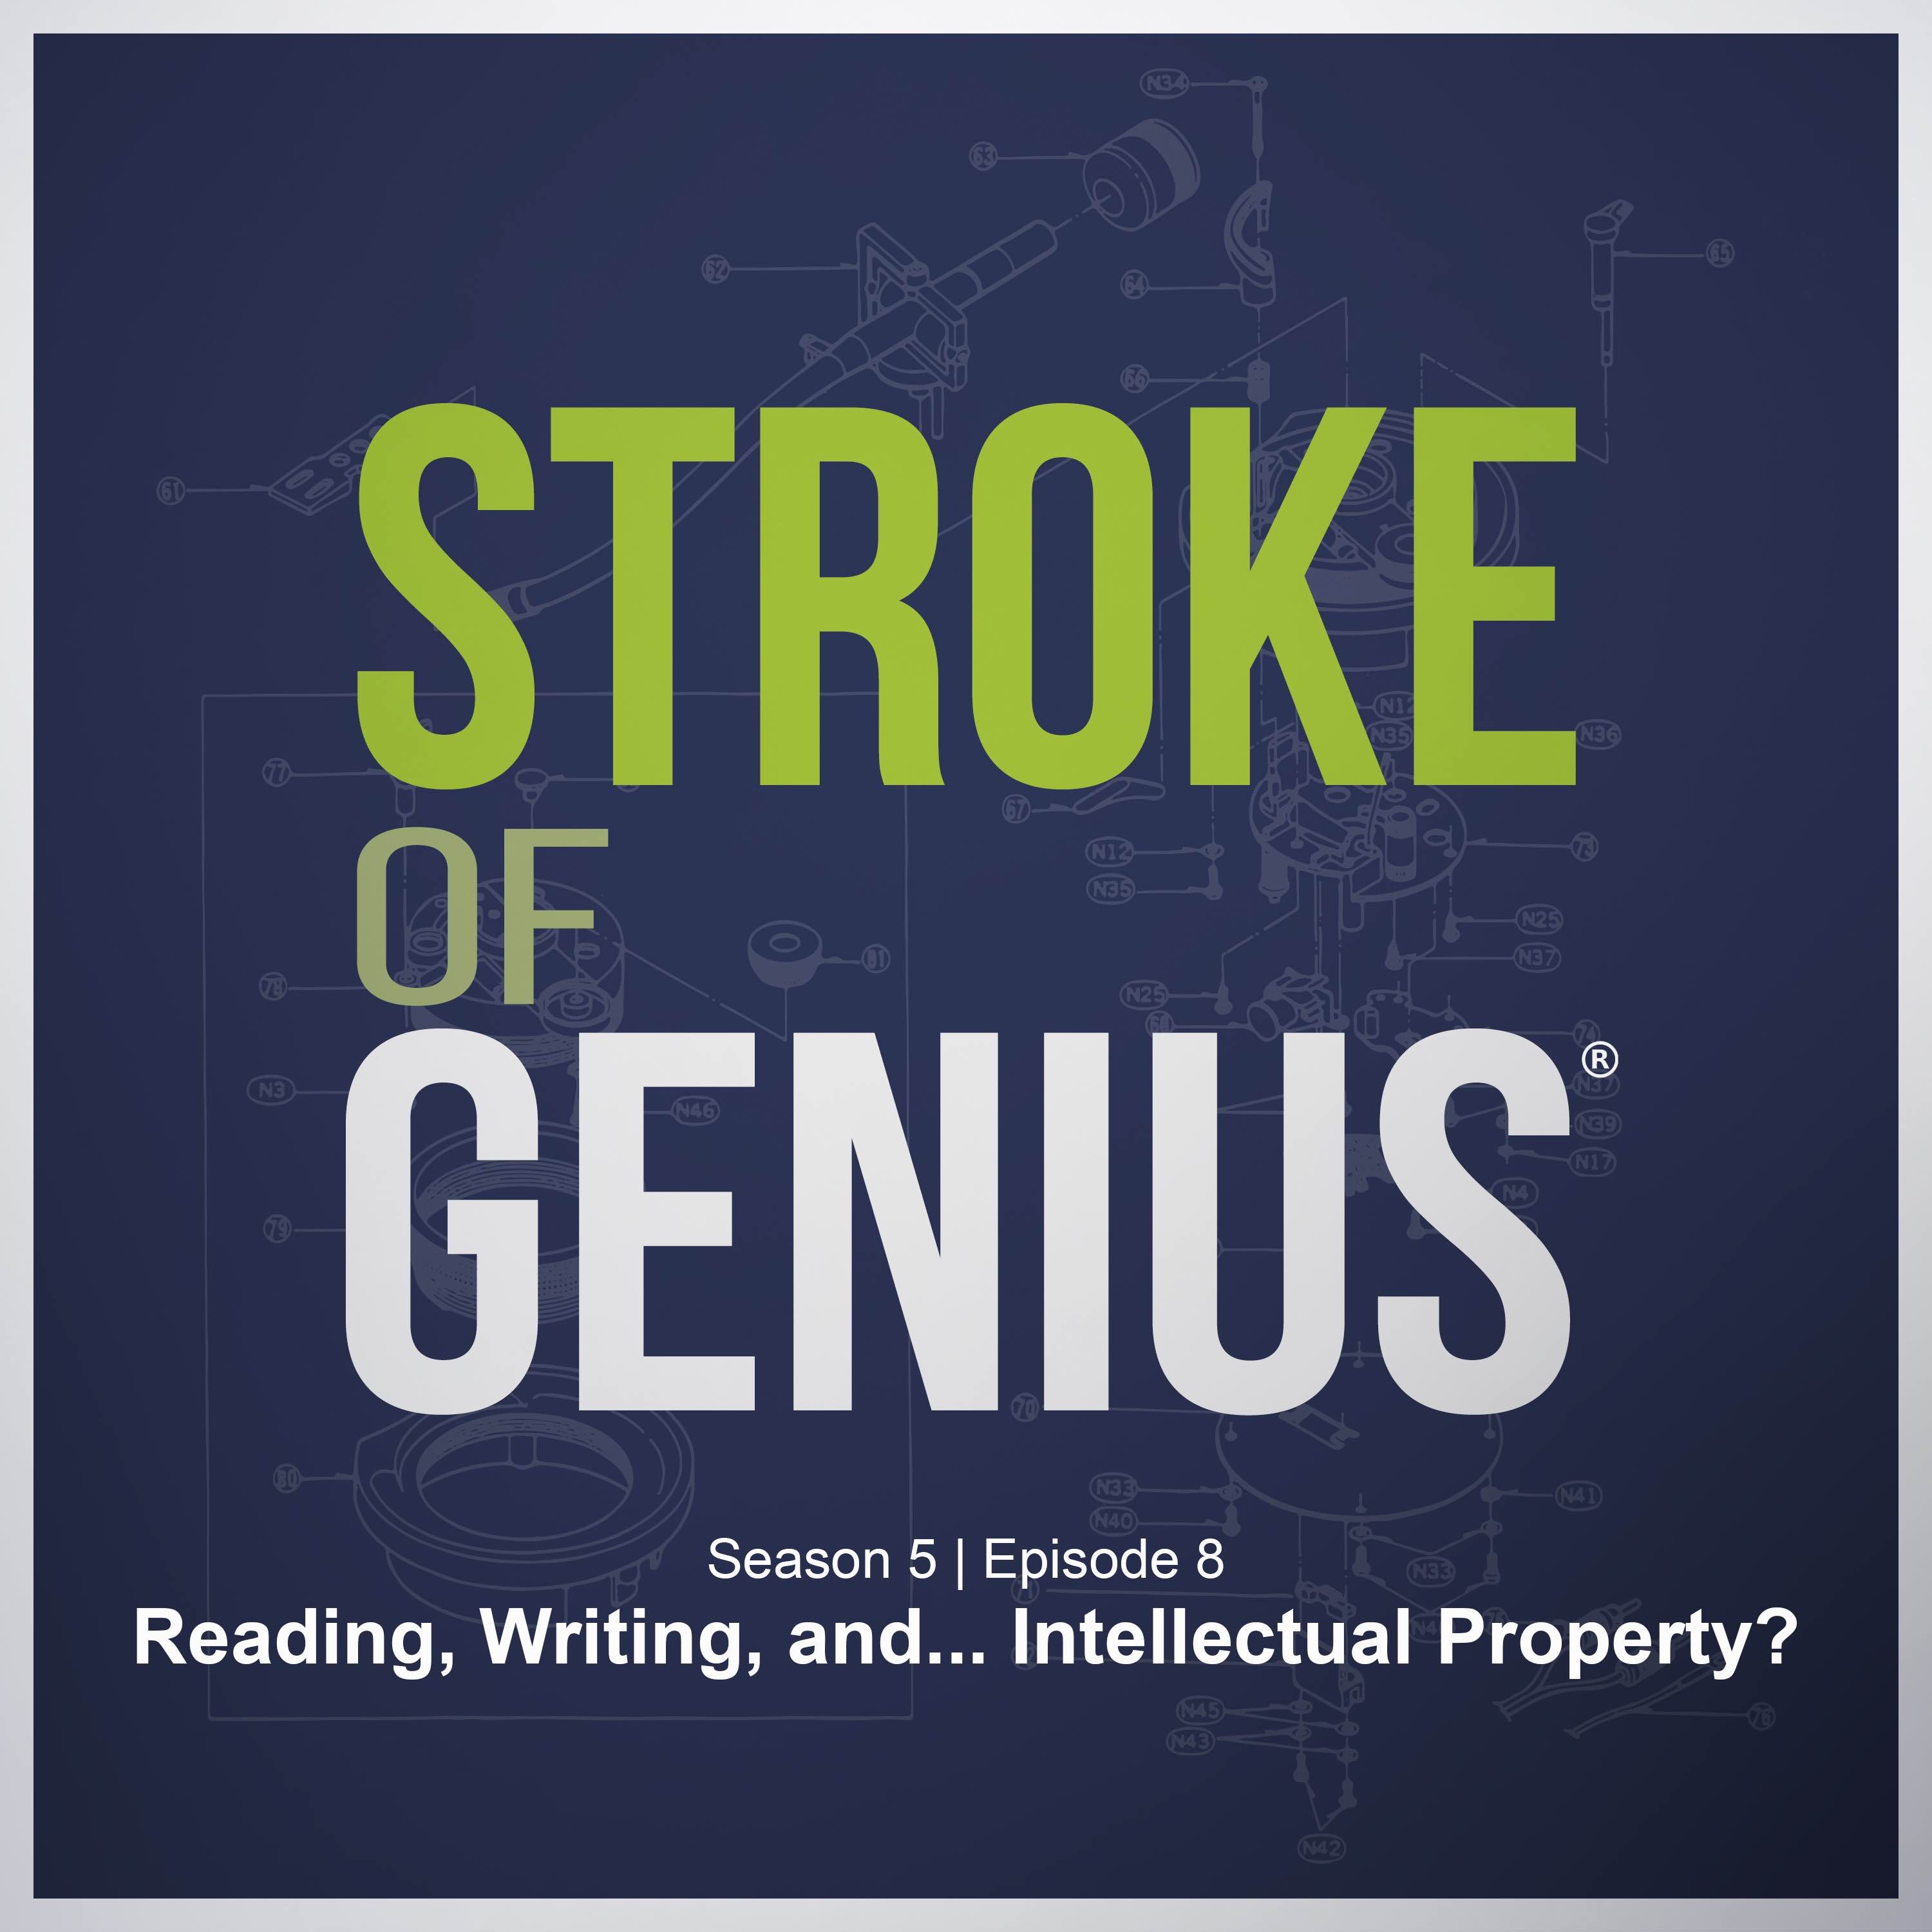 Reading, Writing, and... Intellectual Property?